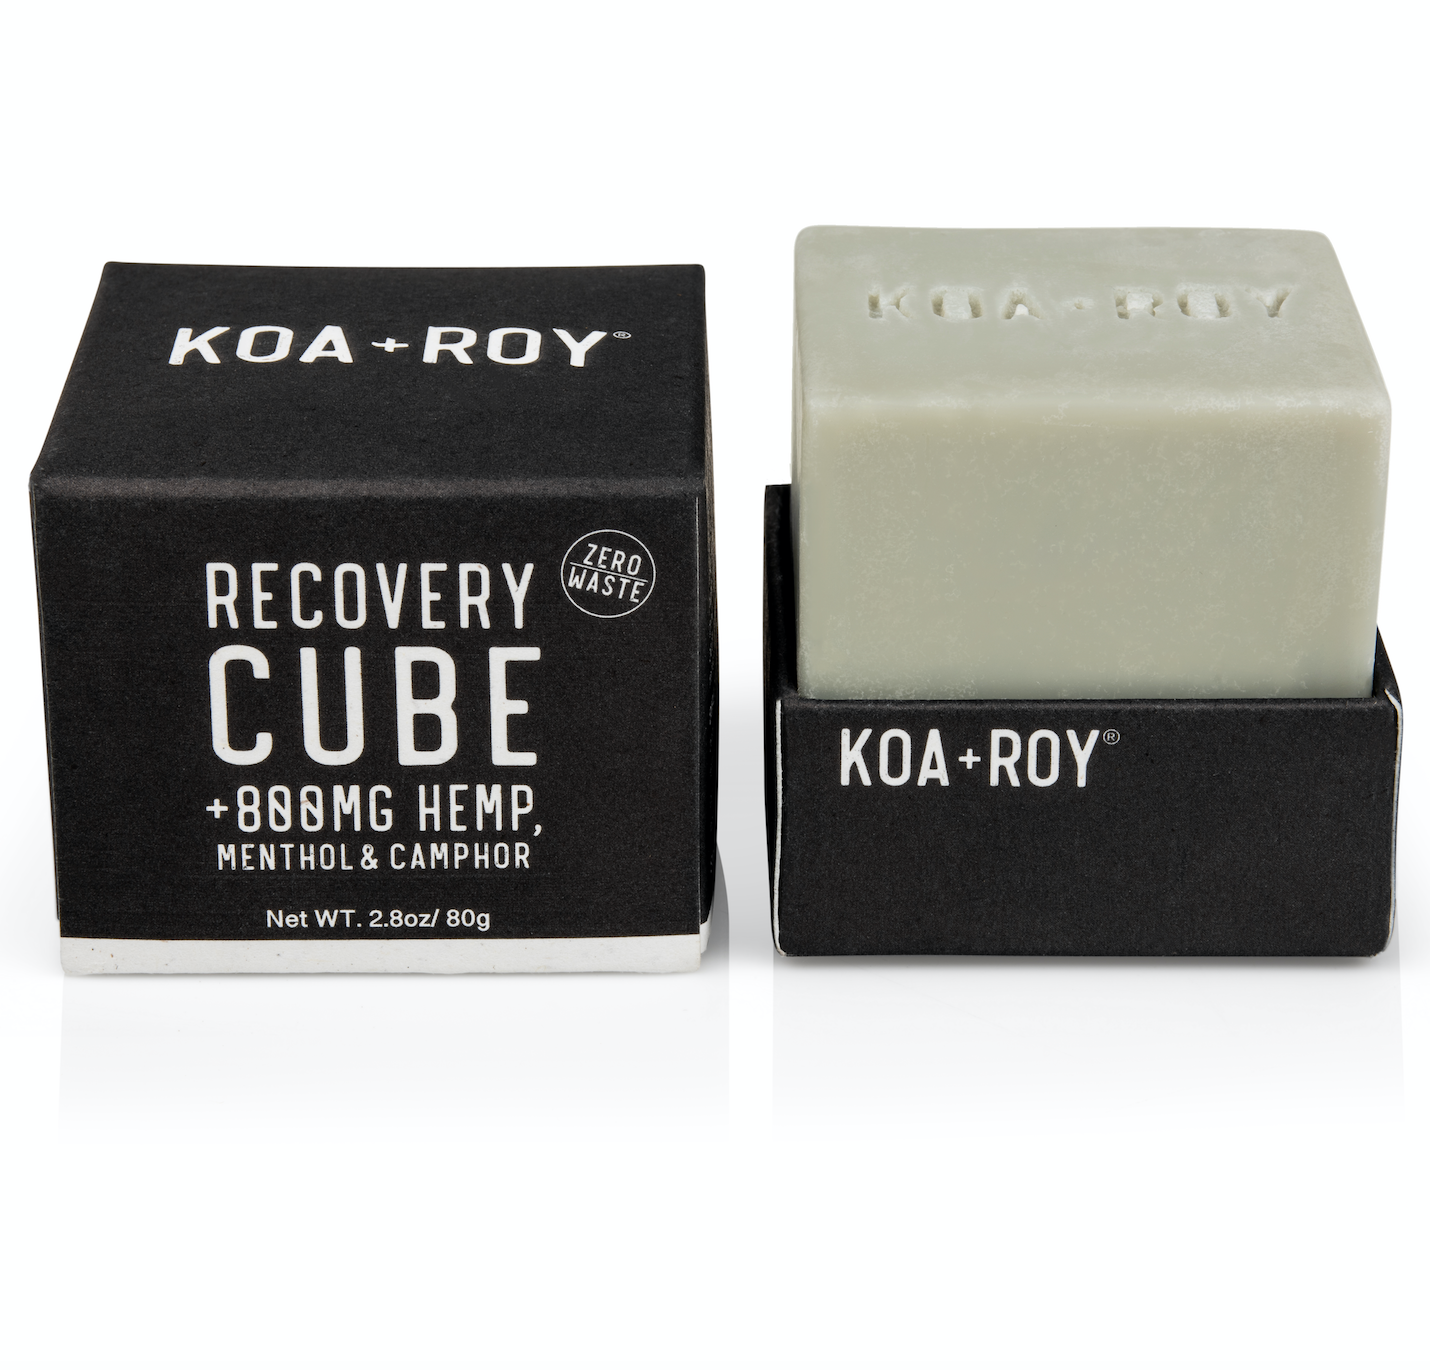 RECOVERY CUBE